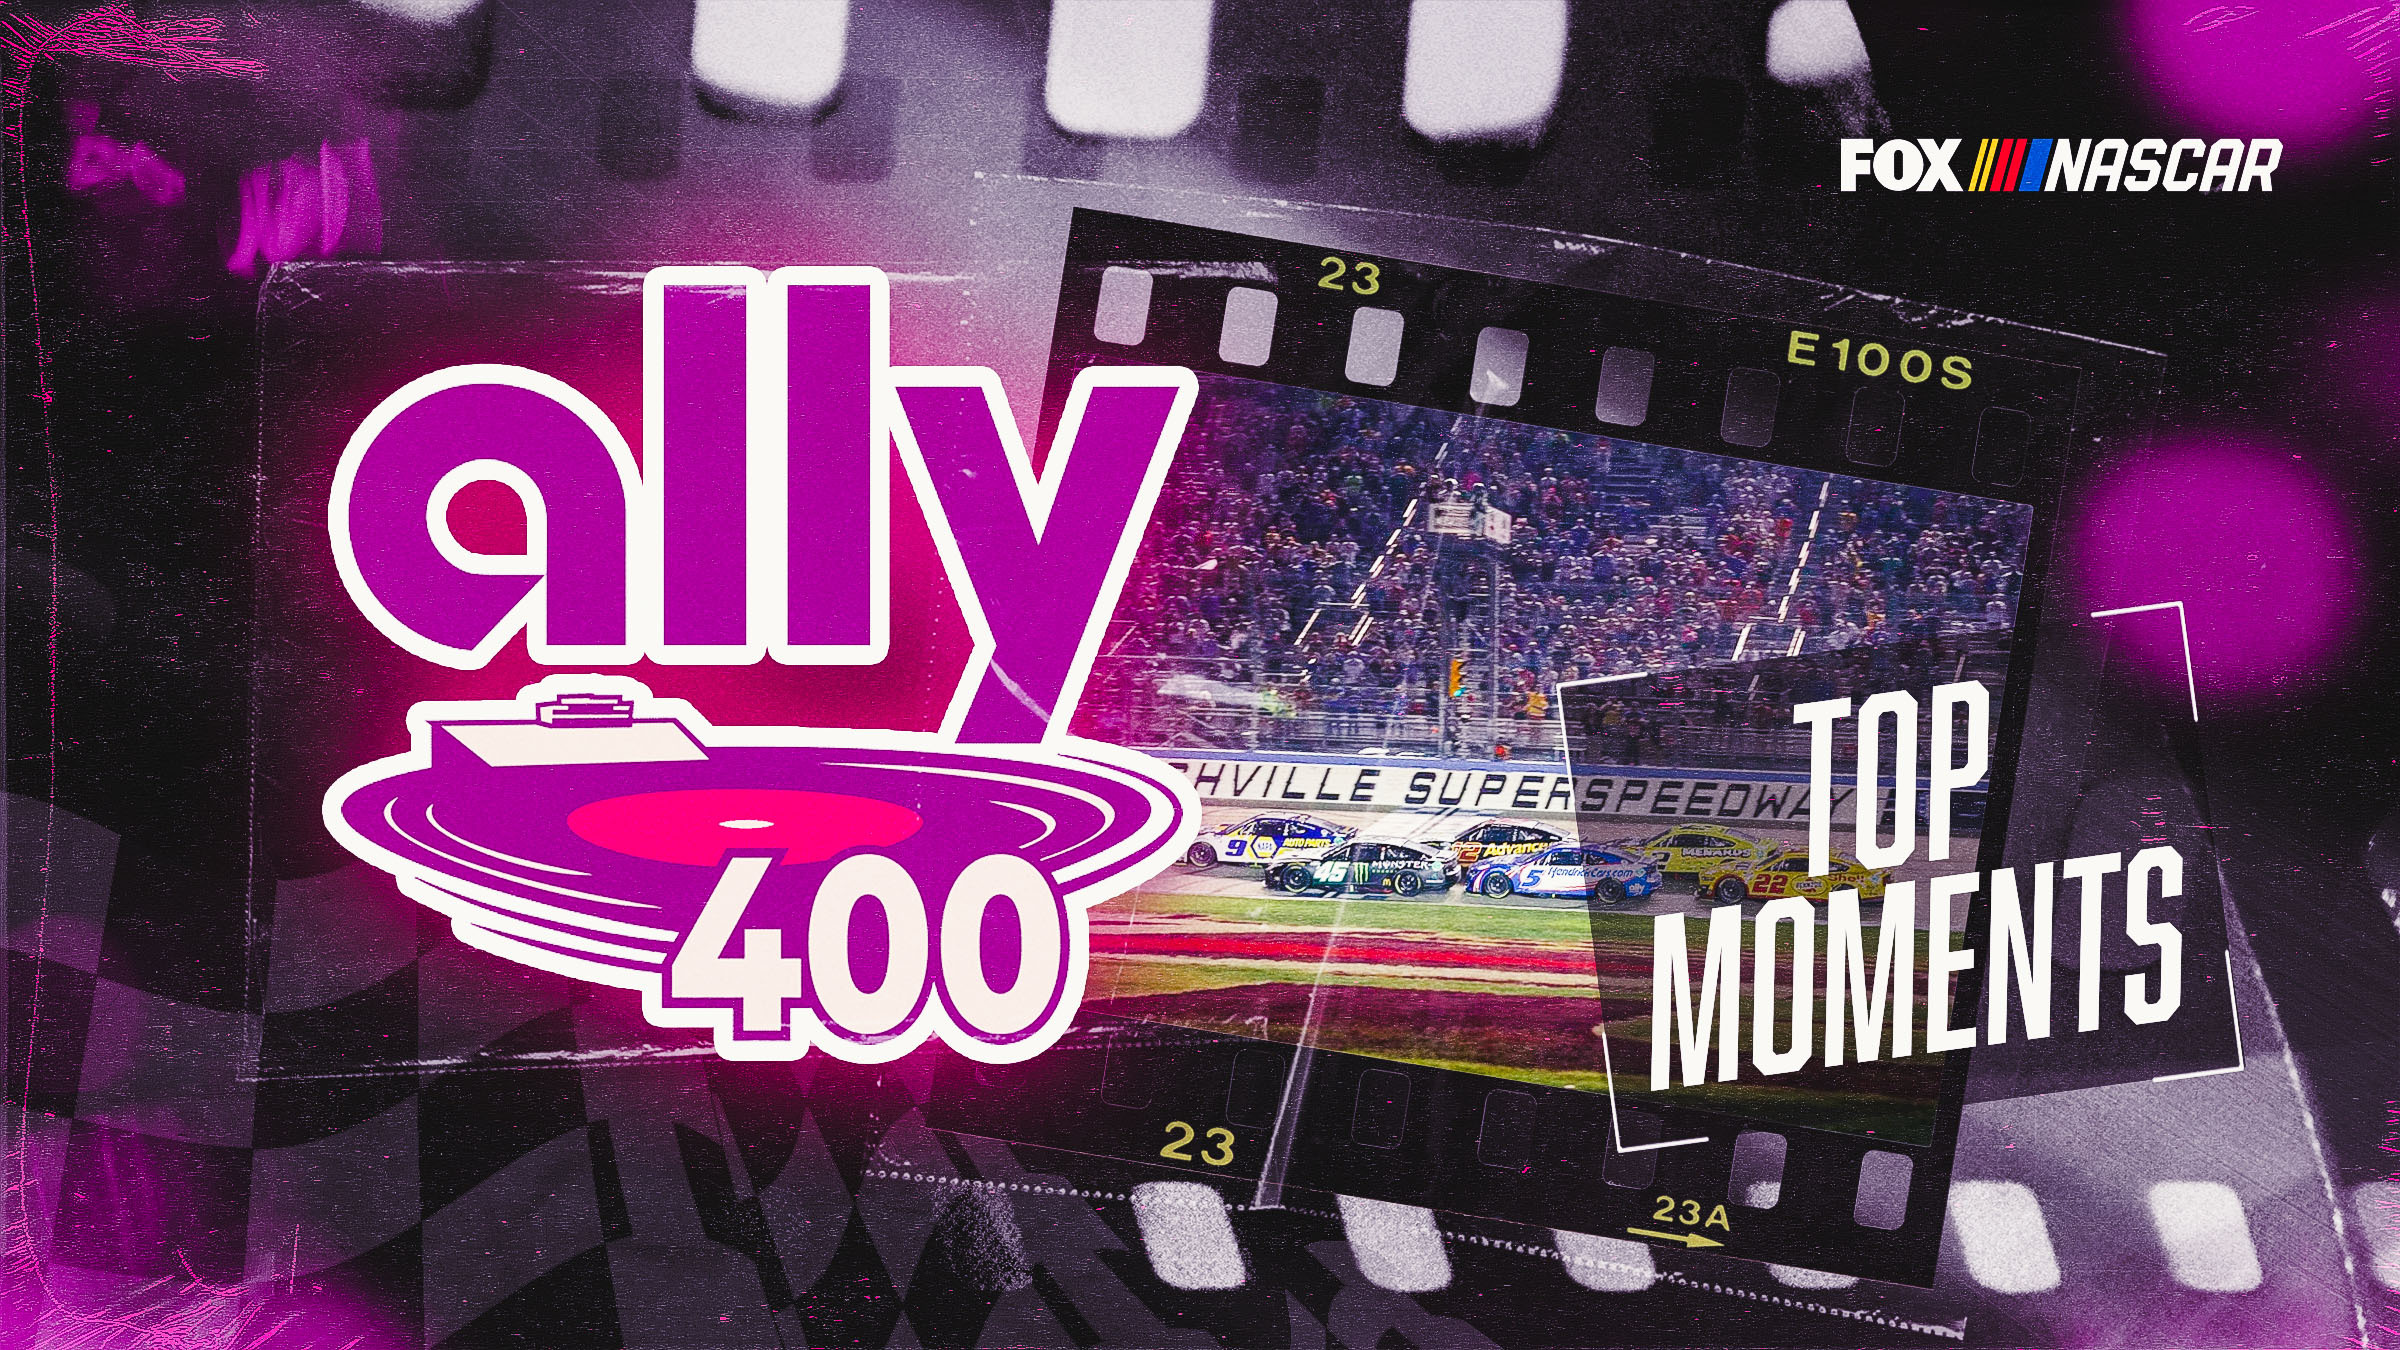 Ally 400 live updates: Top moments from Nashville Superspeedway